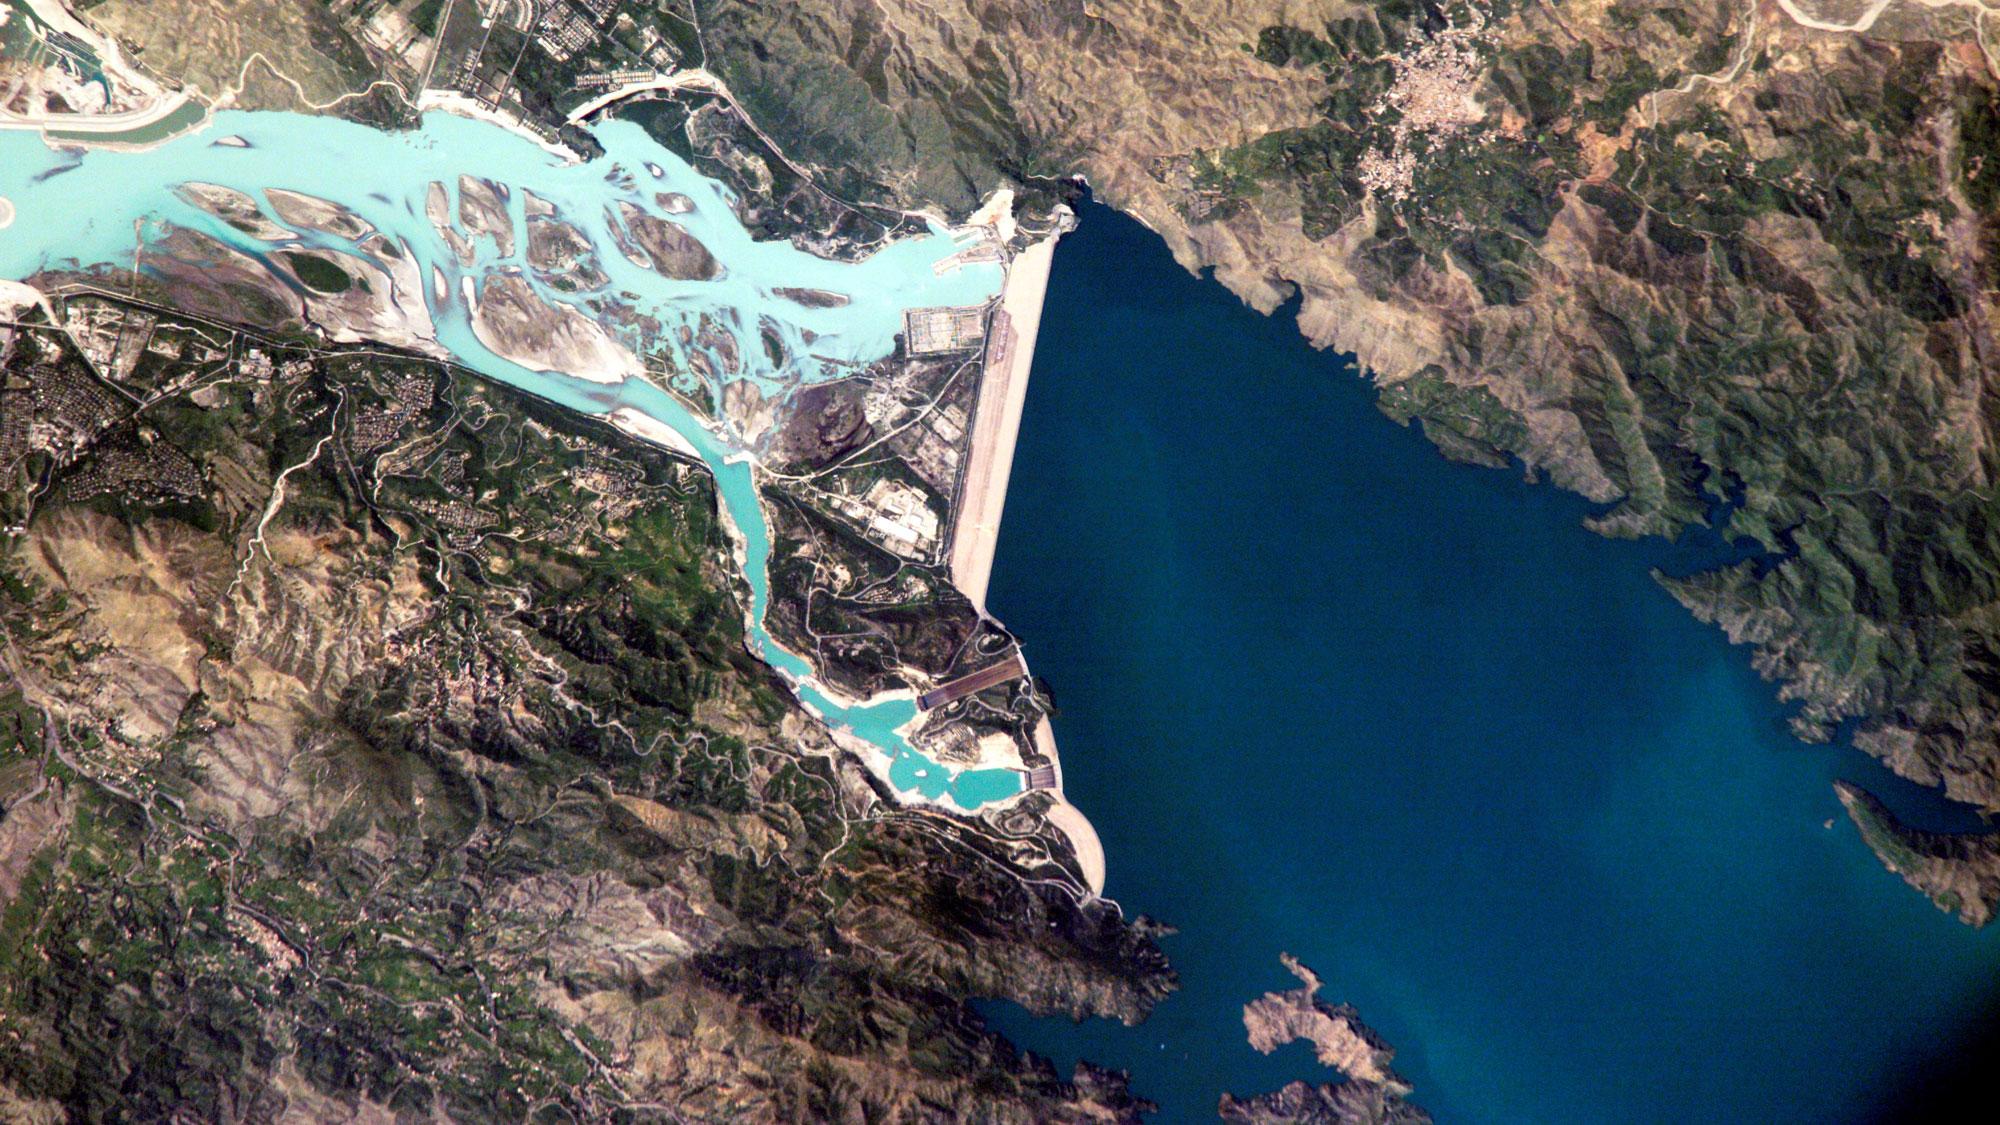 Tarbela Dam, Pakistan – part of the Indus Basin Project that resulted from the 1960 Indus Waters Treaty between India and Pakistan. Source: NASA